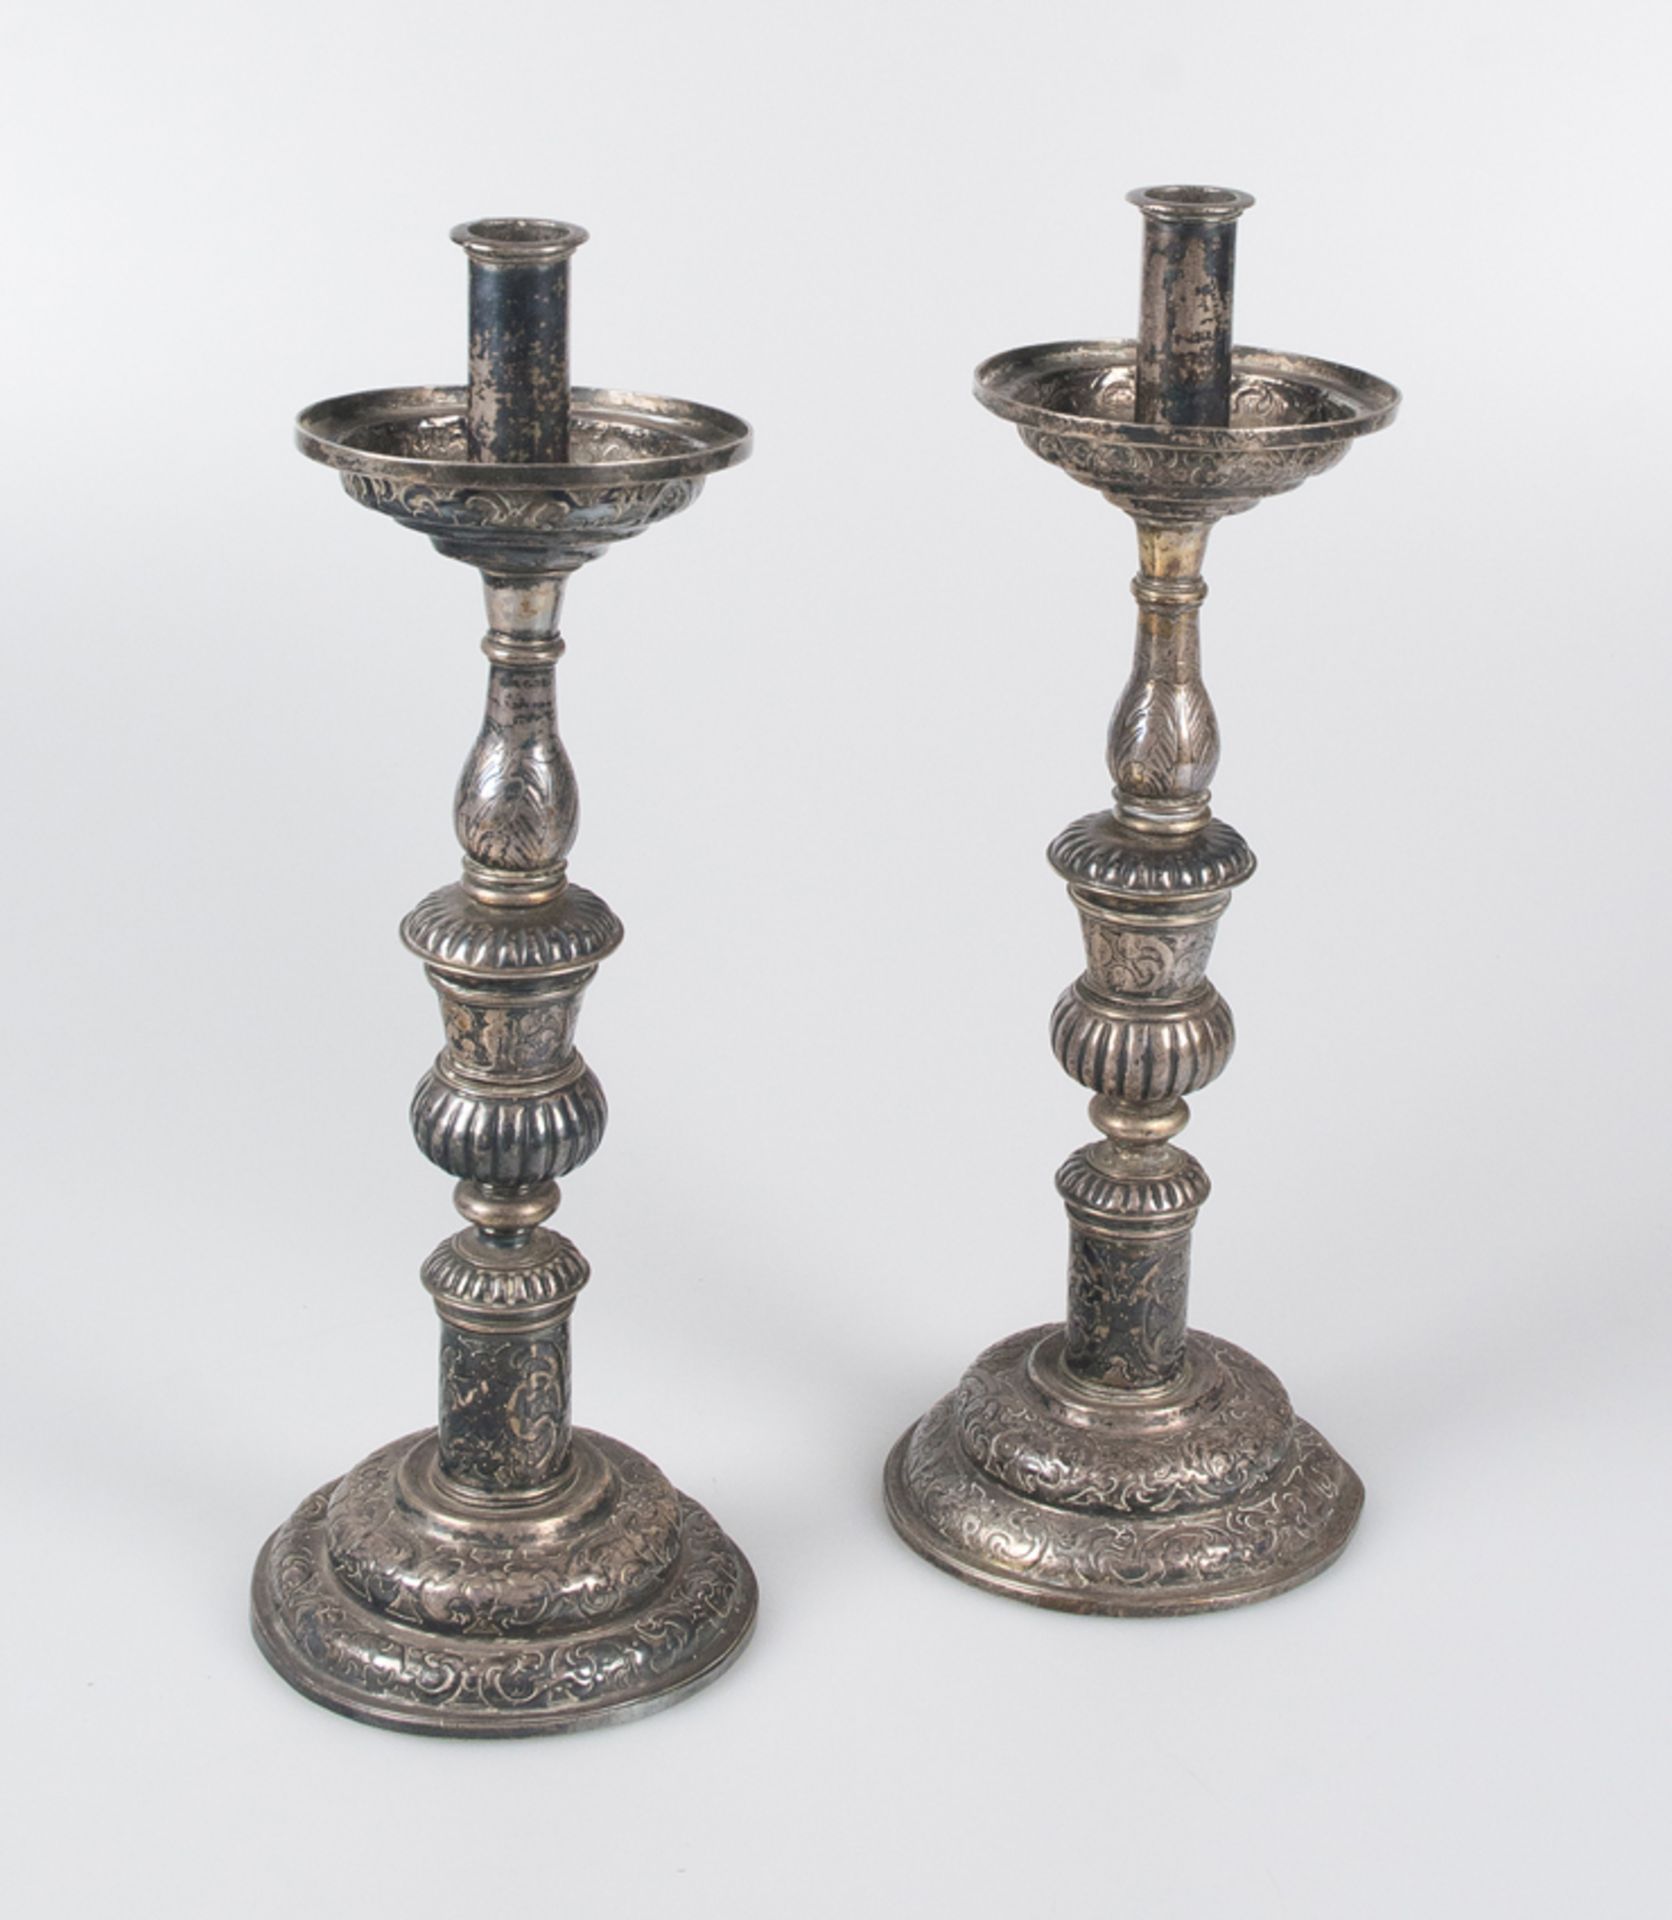 Pair of embossed and chased Spanish silver candlesticks. 16th 17th century. - Image 4 of 8